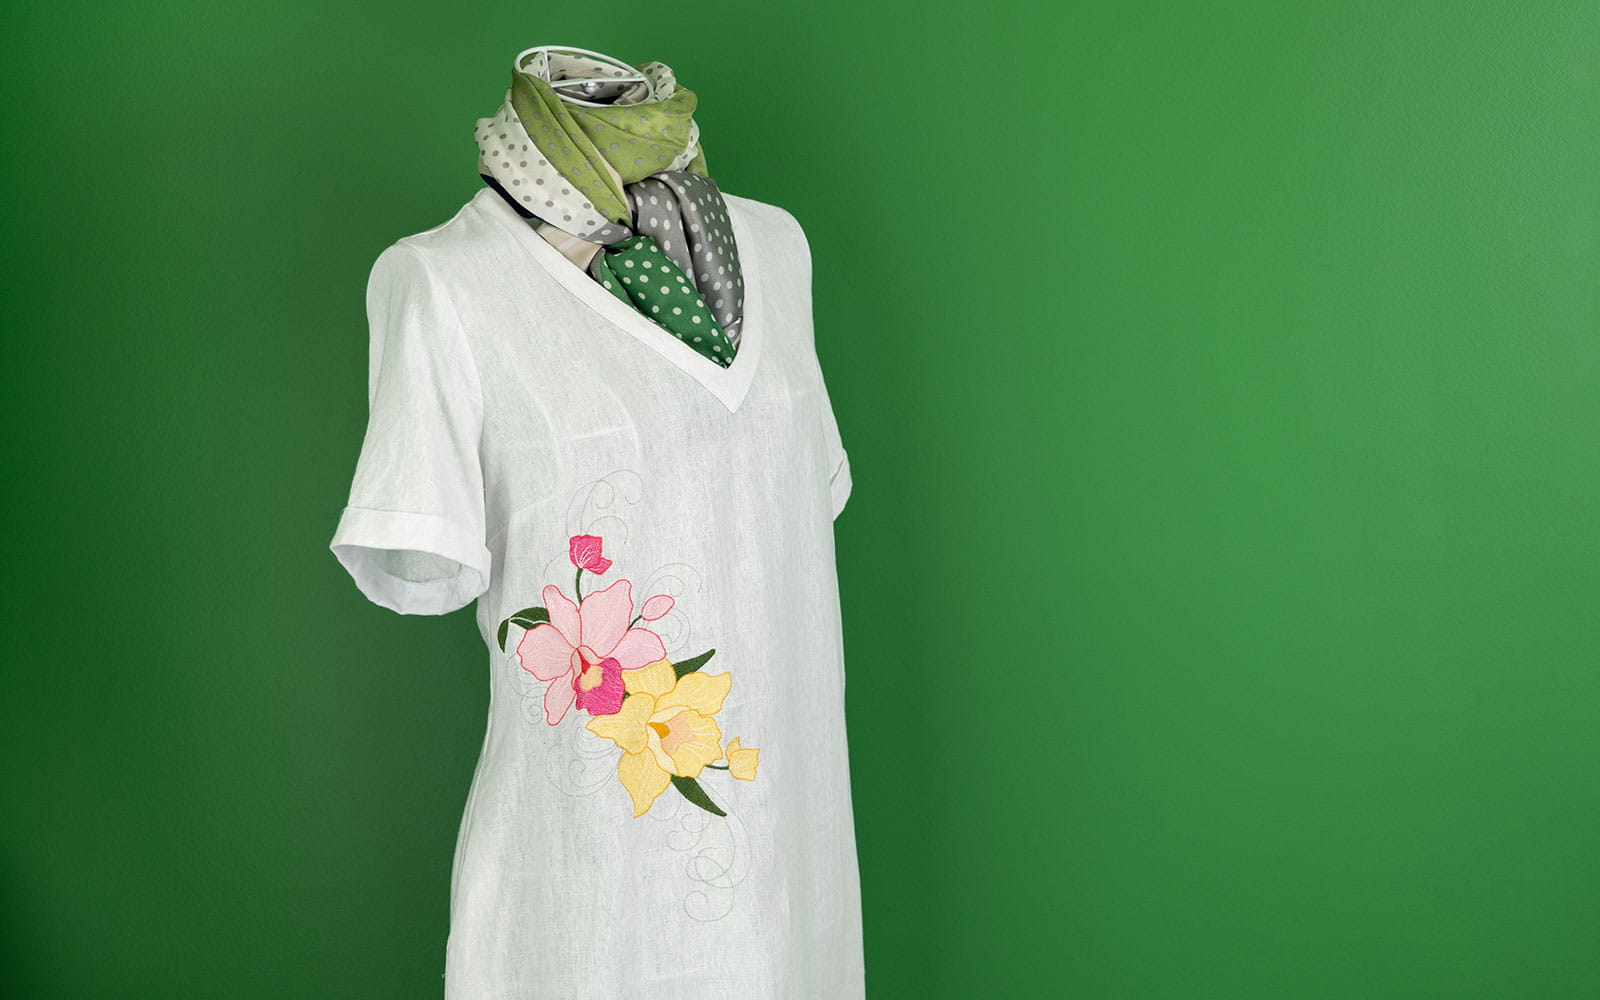 linen dress with pink and yellow orchid embroidery against dark green wall